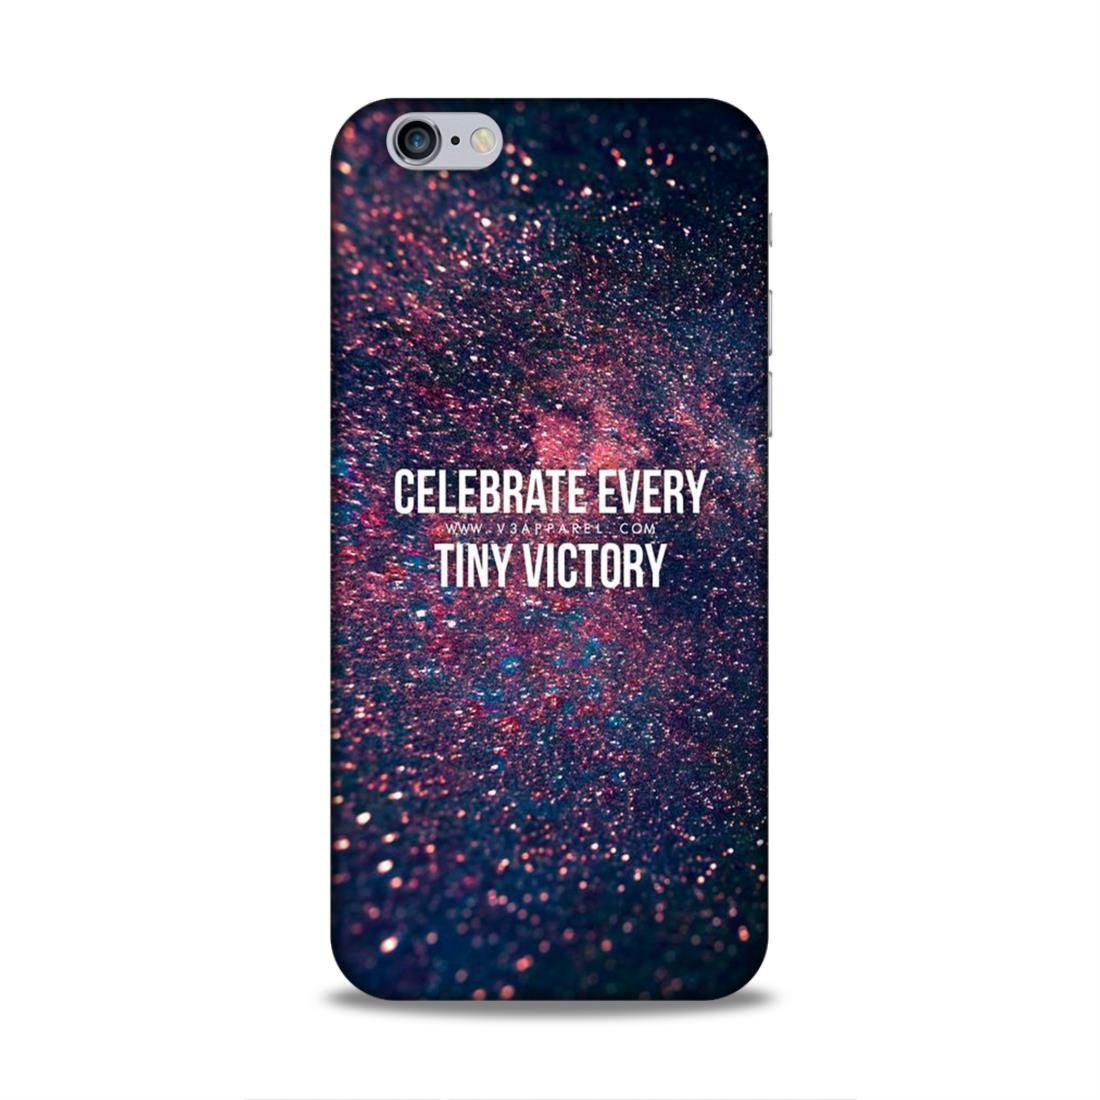 Celebrate Tiny Victory iPhone 6 Mobile Cover